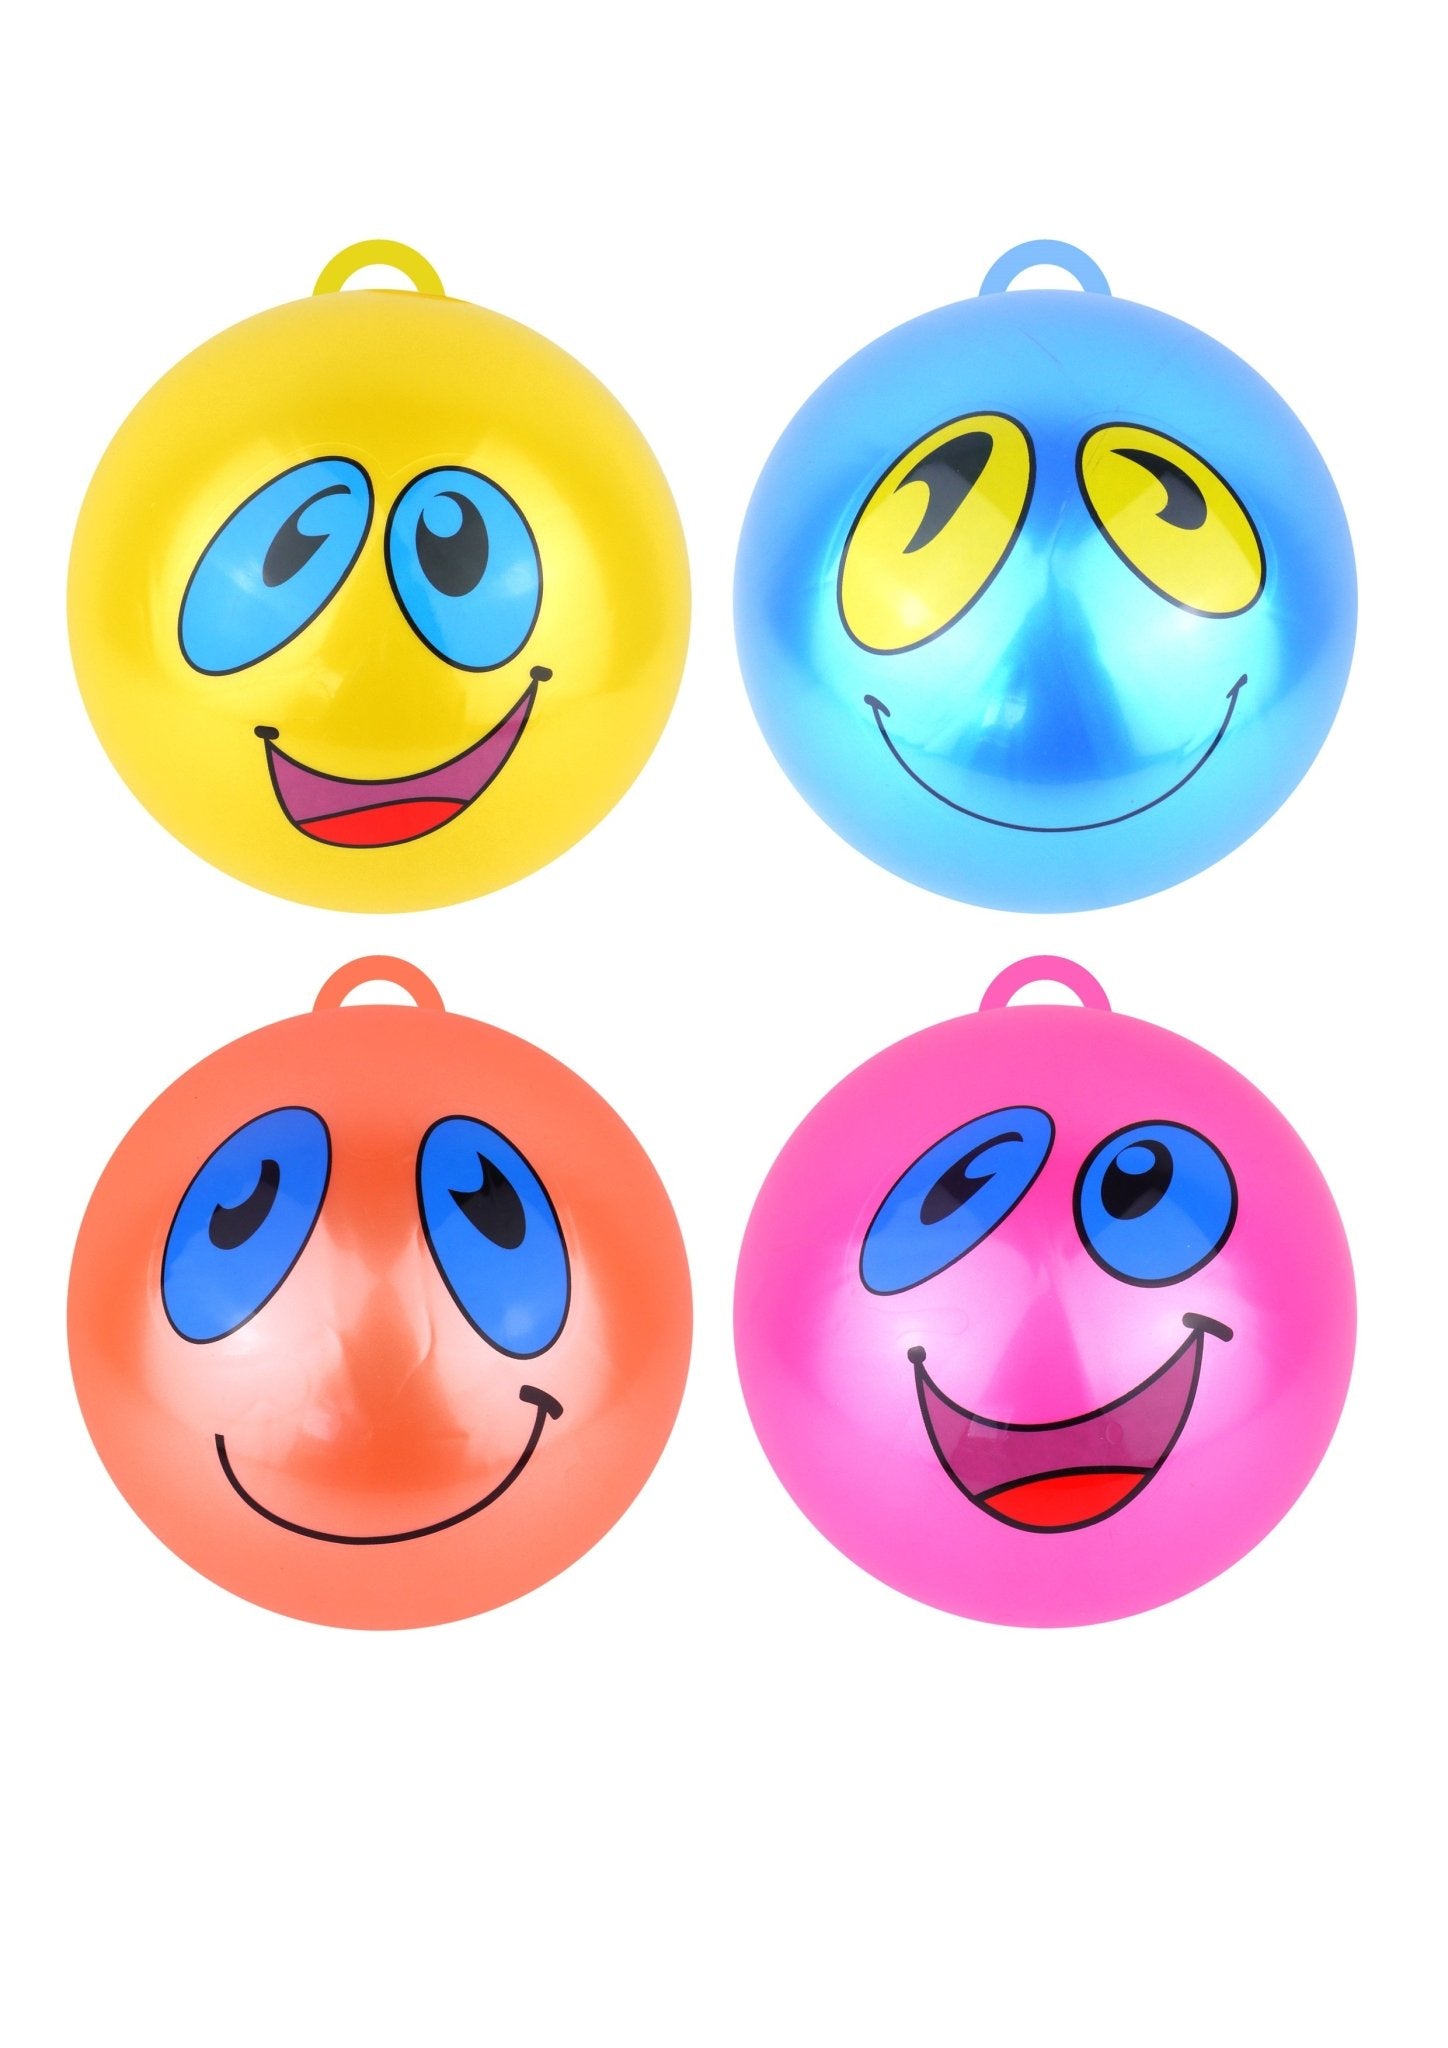 24 x Fruity Scented Bounce Balls with Hooks and Silly Faces (25cm) 4 Assorted Designs - Bulk Bargain